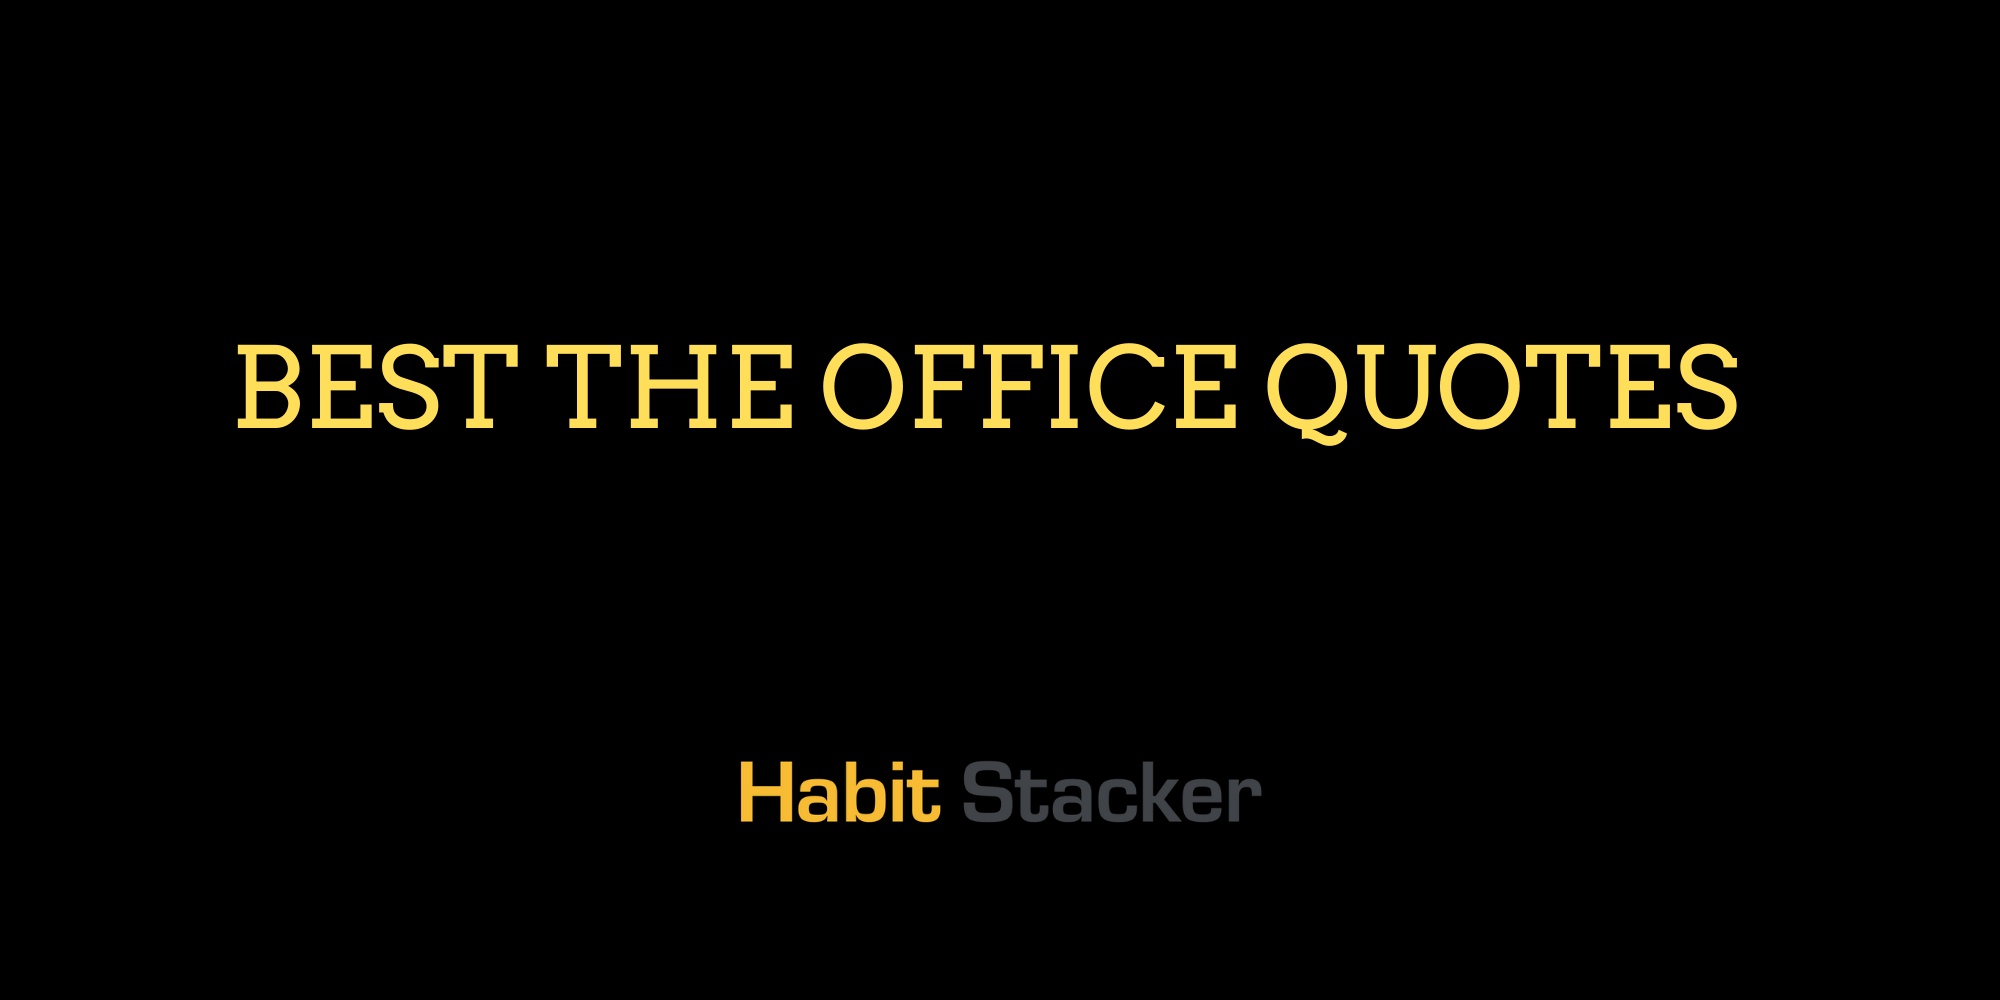 36 Best The Office Quotes - Habit Stacker